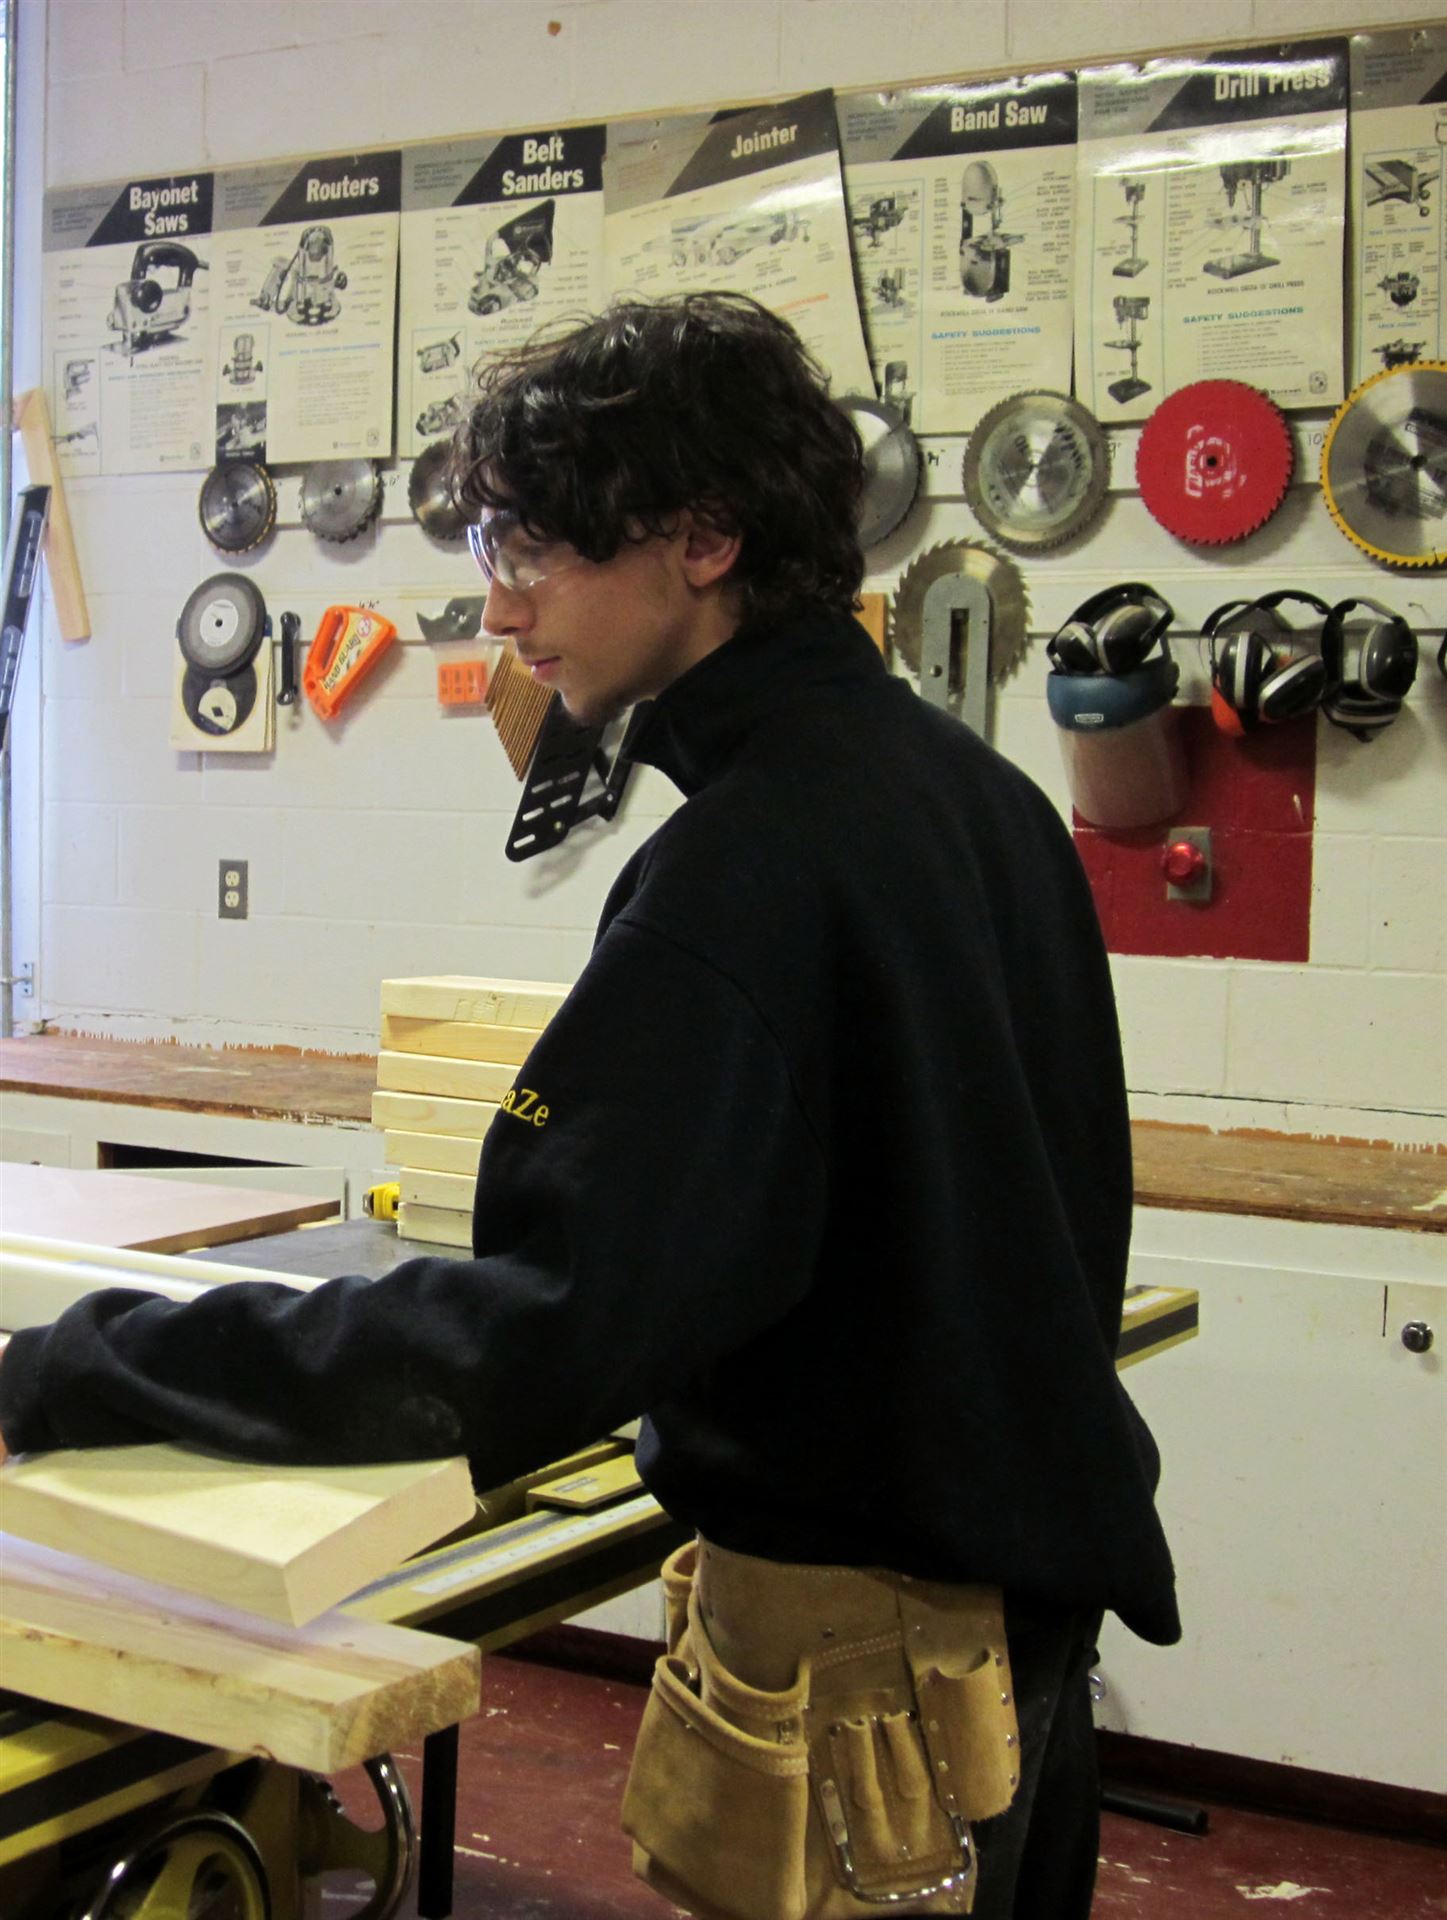 Student working in carpentry shop